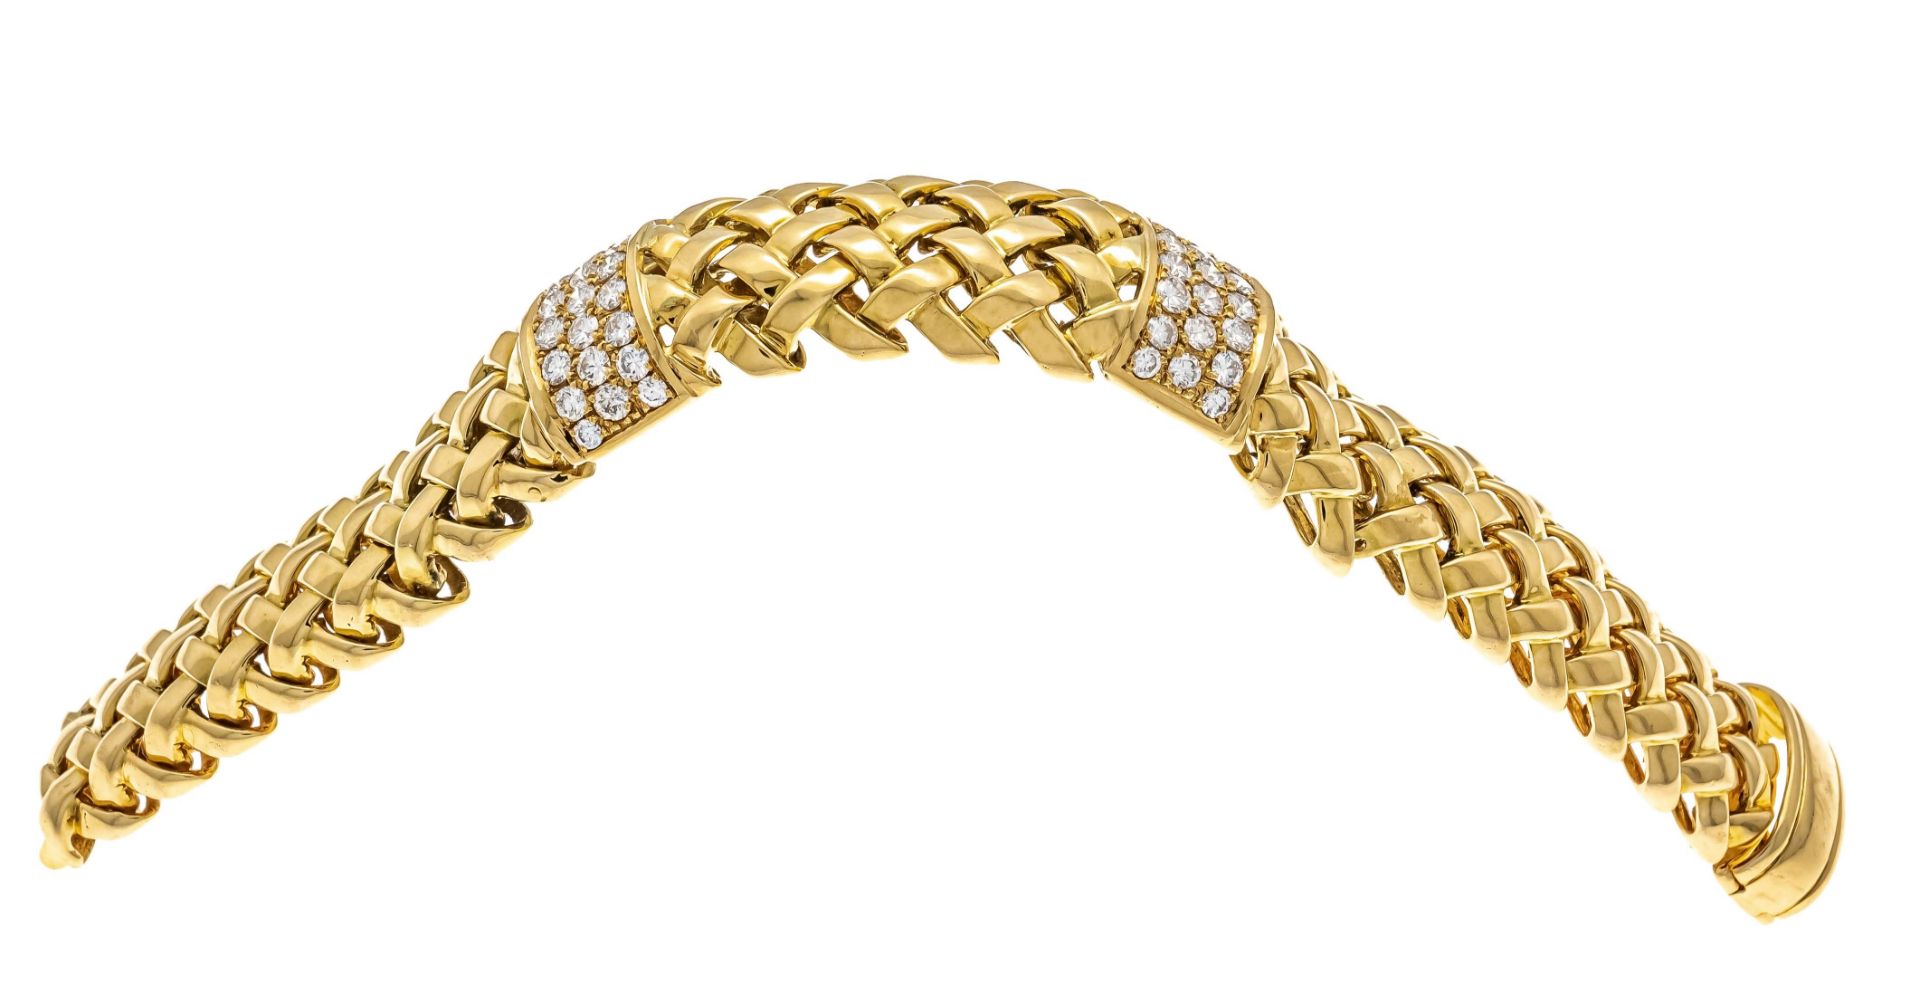 Heavy Tiffany & Co. link bracelet from the Vannerie Collection GG 750/000 with 45 brilliant-cut - Image 2 of 3